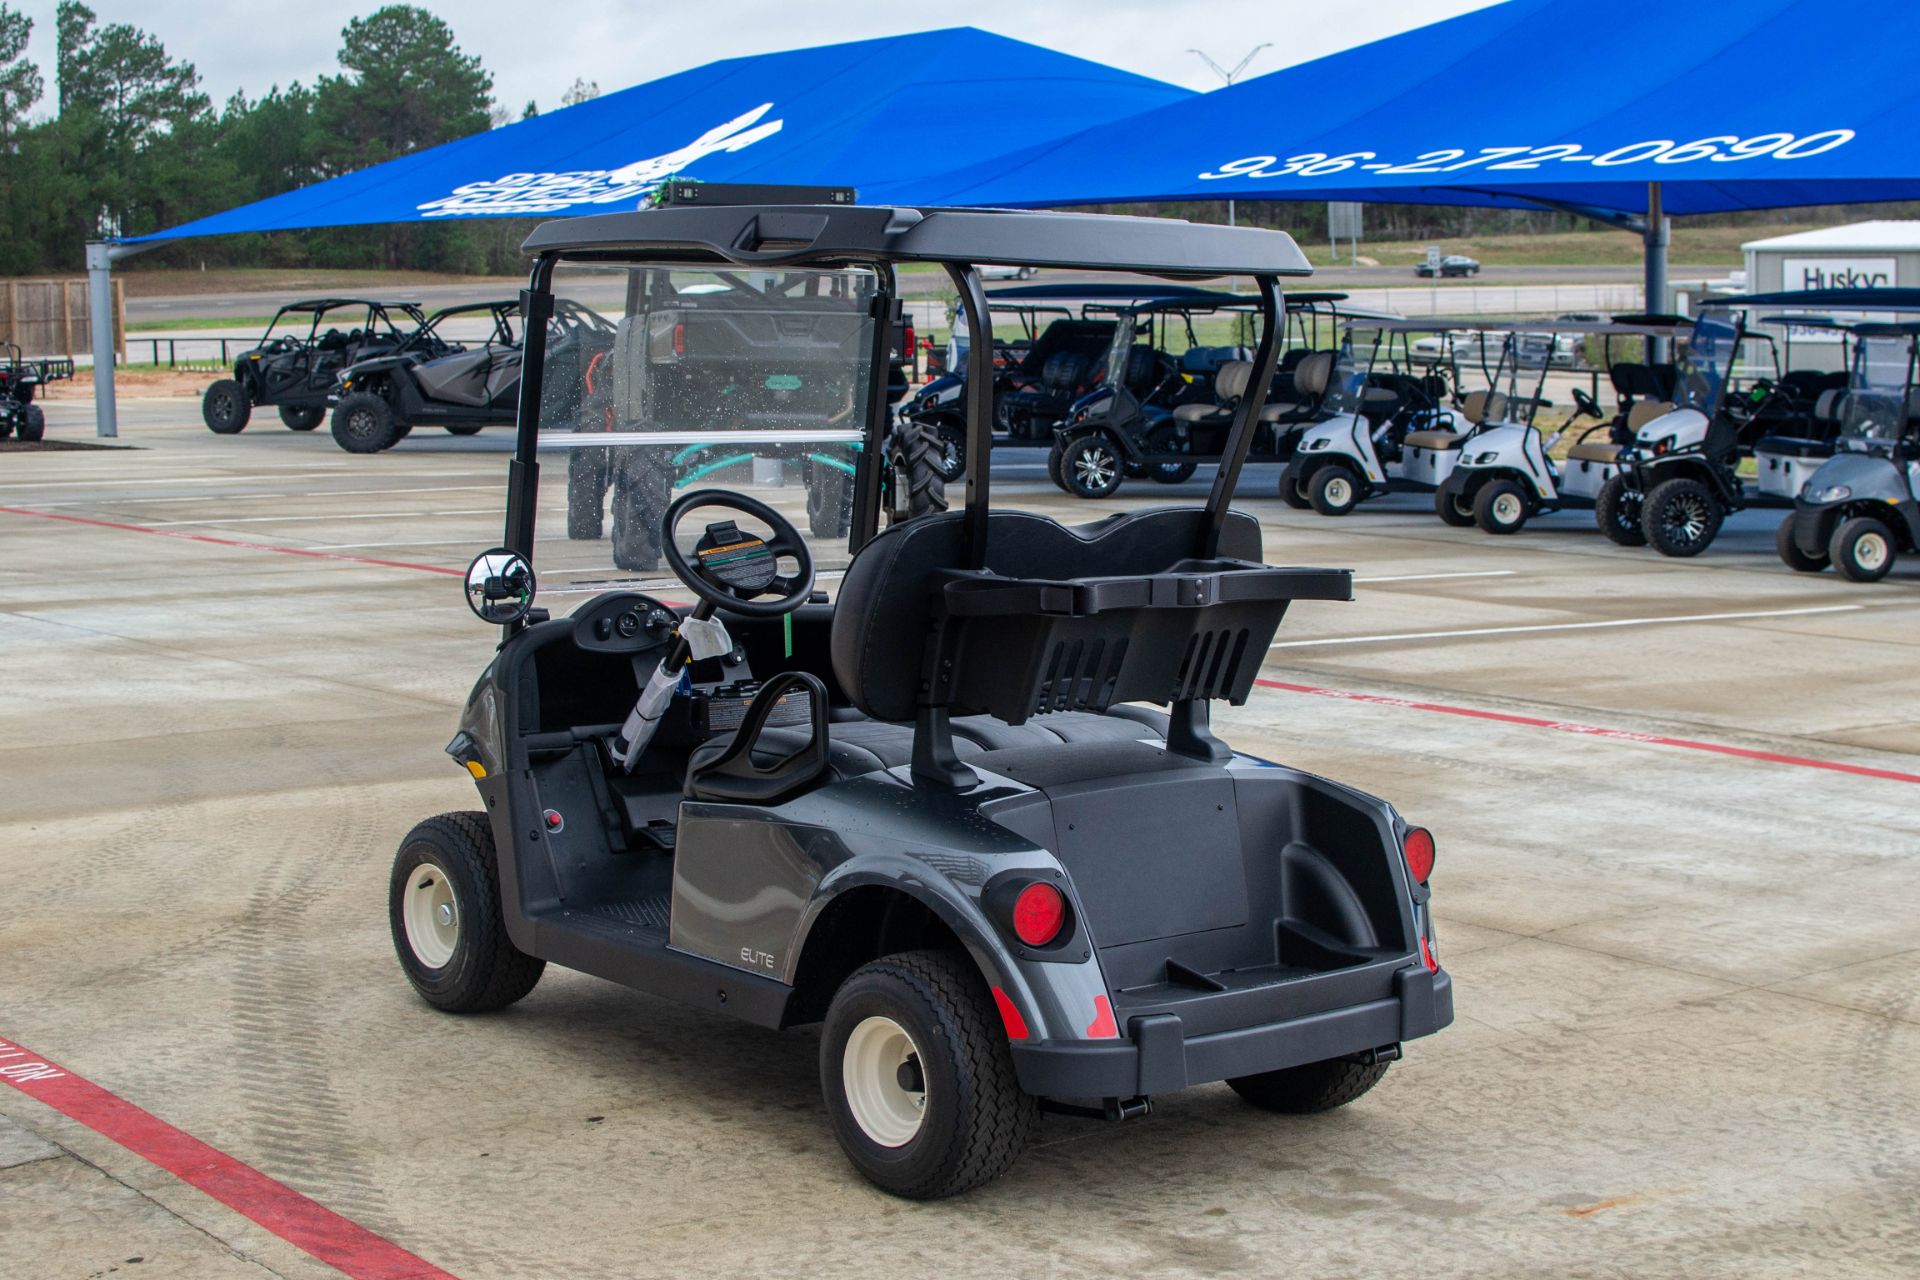 2023 E-Z-GO Freedom RXV ELiTE 2.2 Single Pack with Light World Charger in Huntsville, Texas - Photo 7